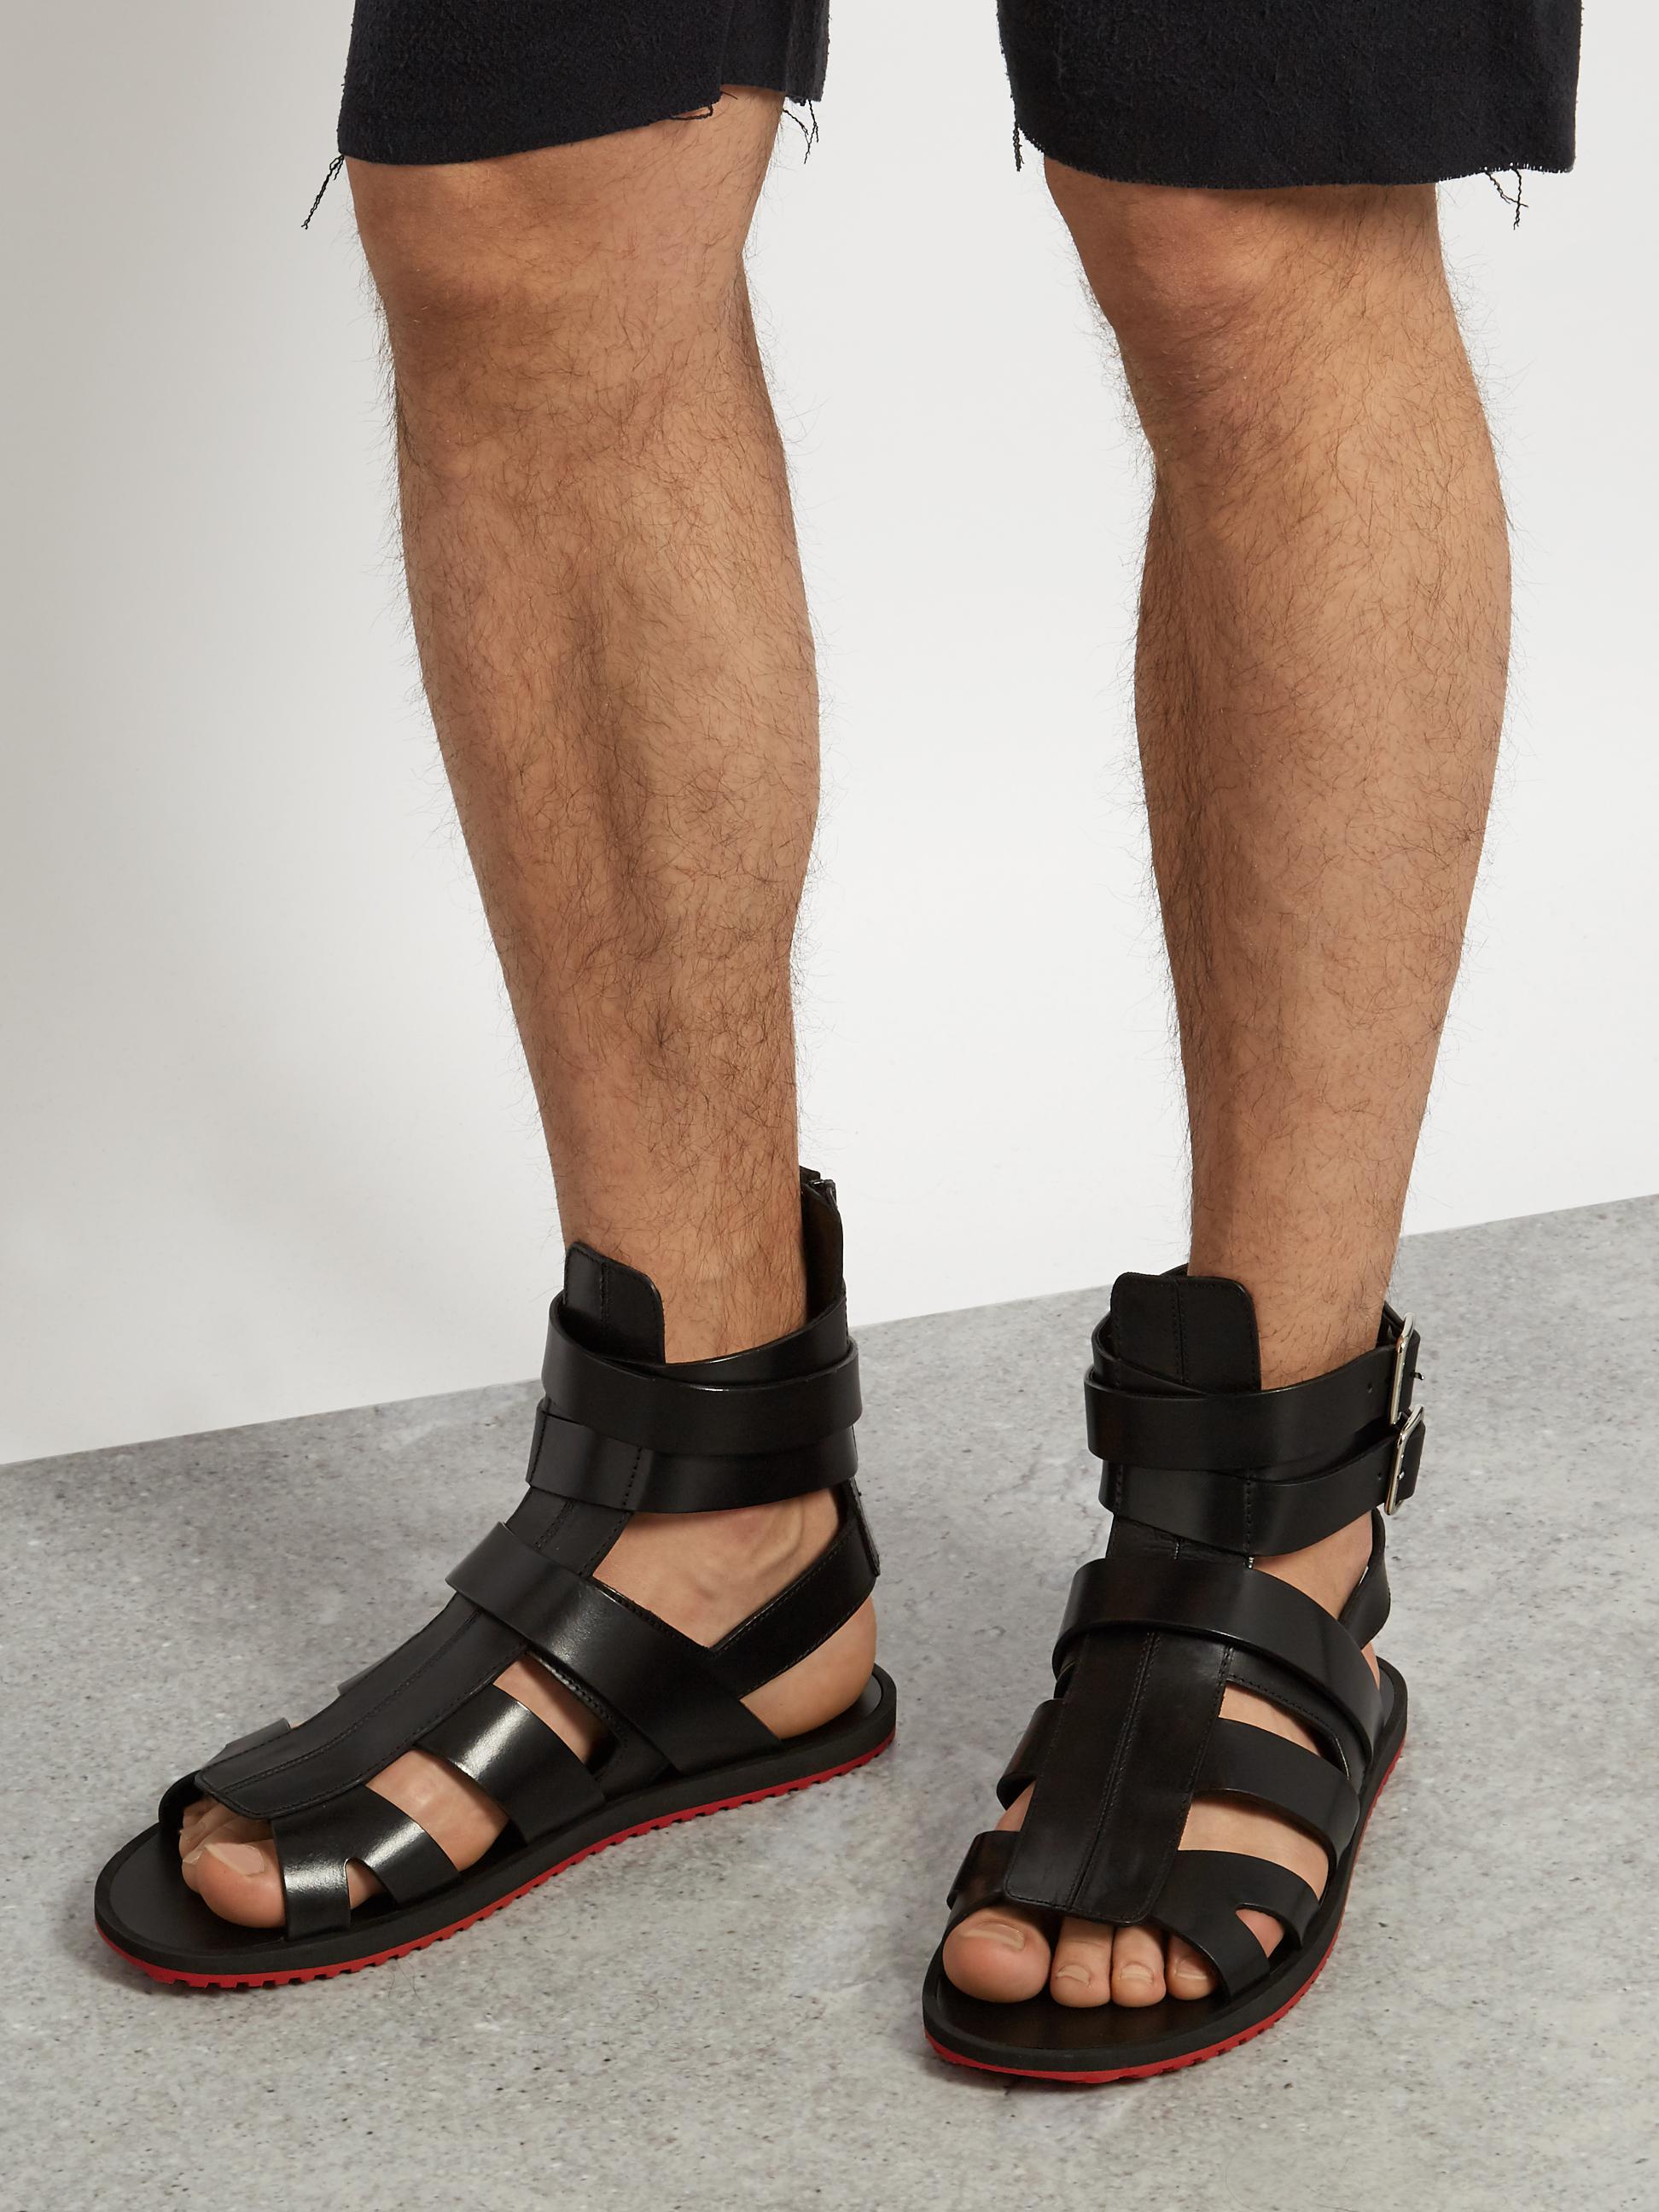 Givenchy Gladiator Leather Sandals in Black for Men - Lyst